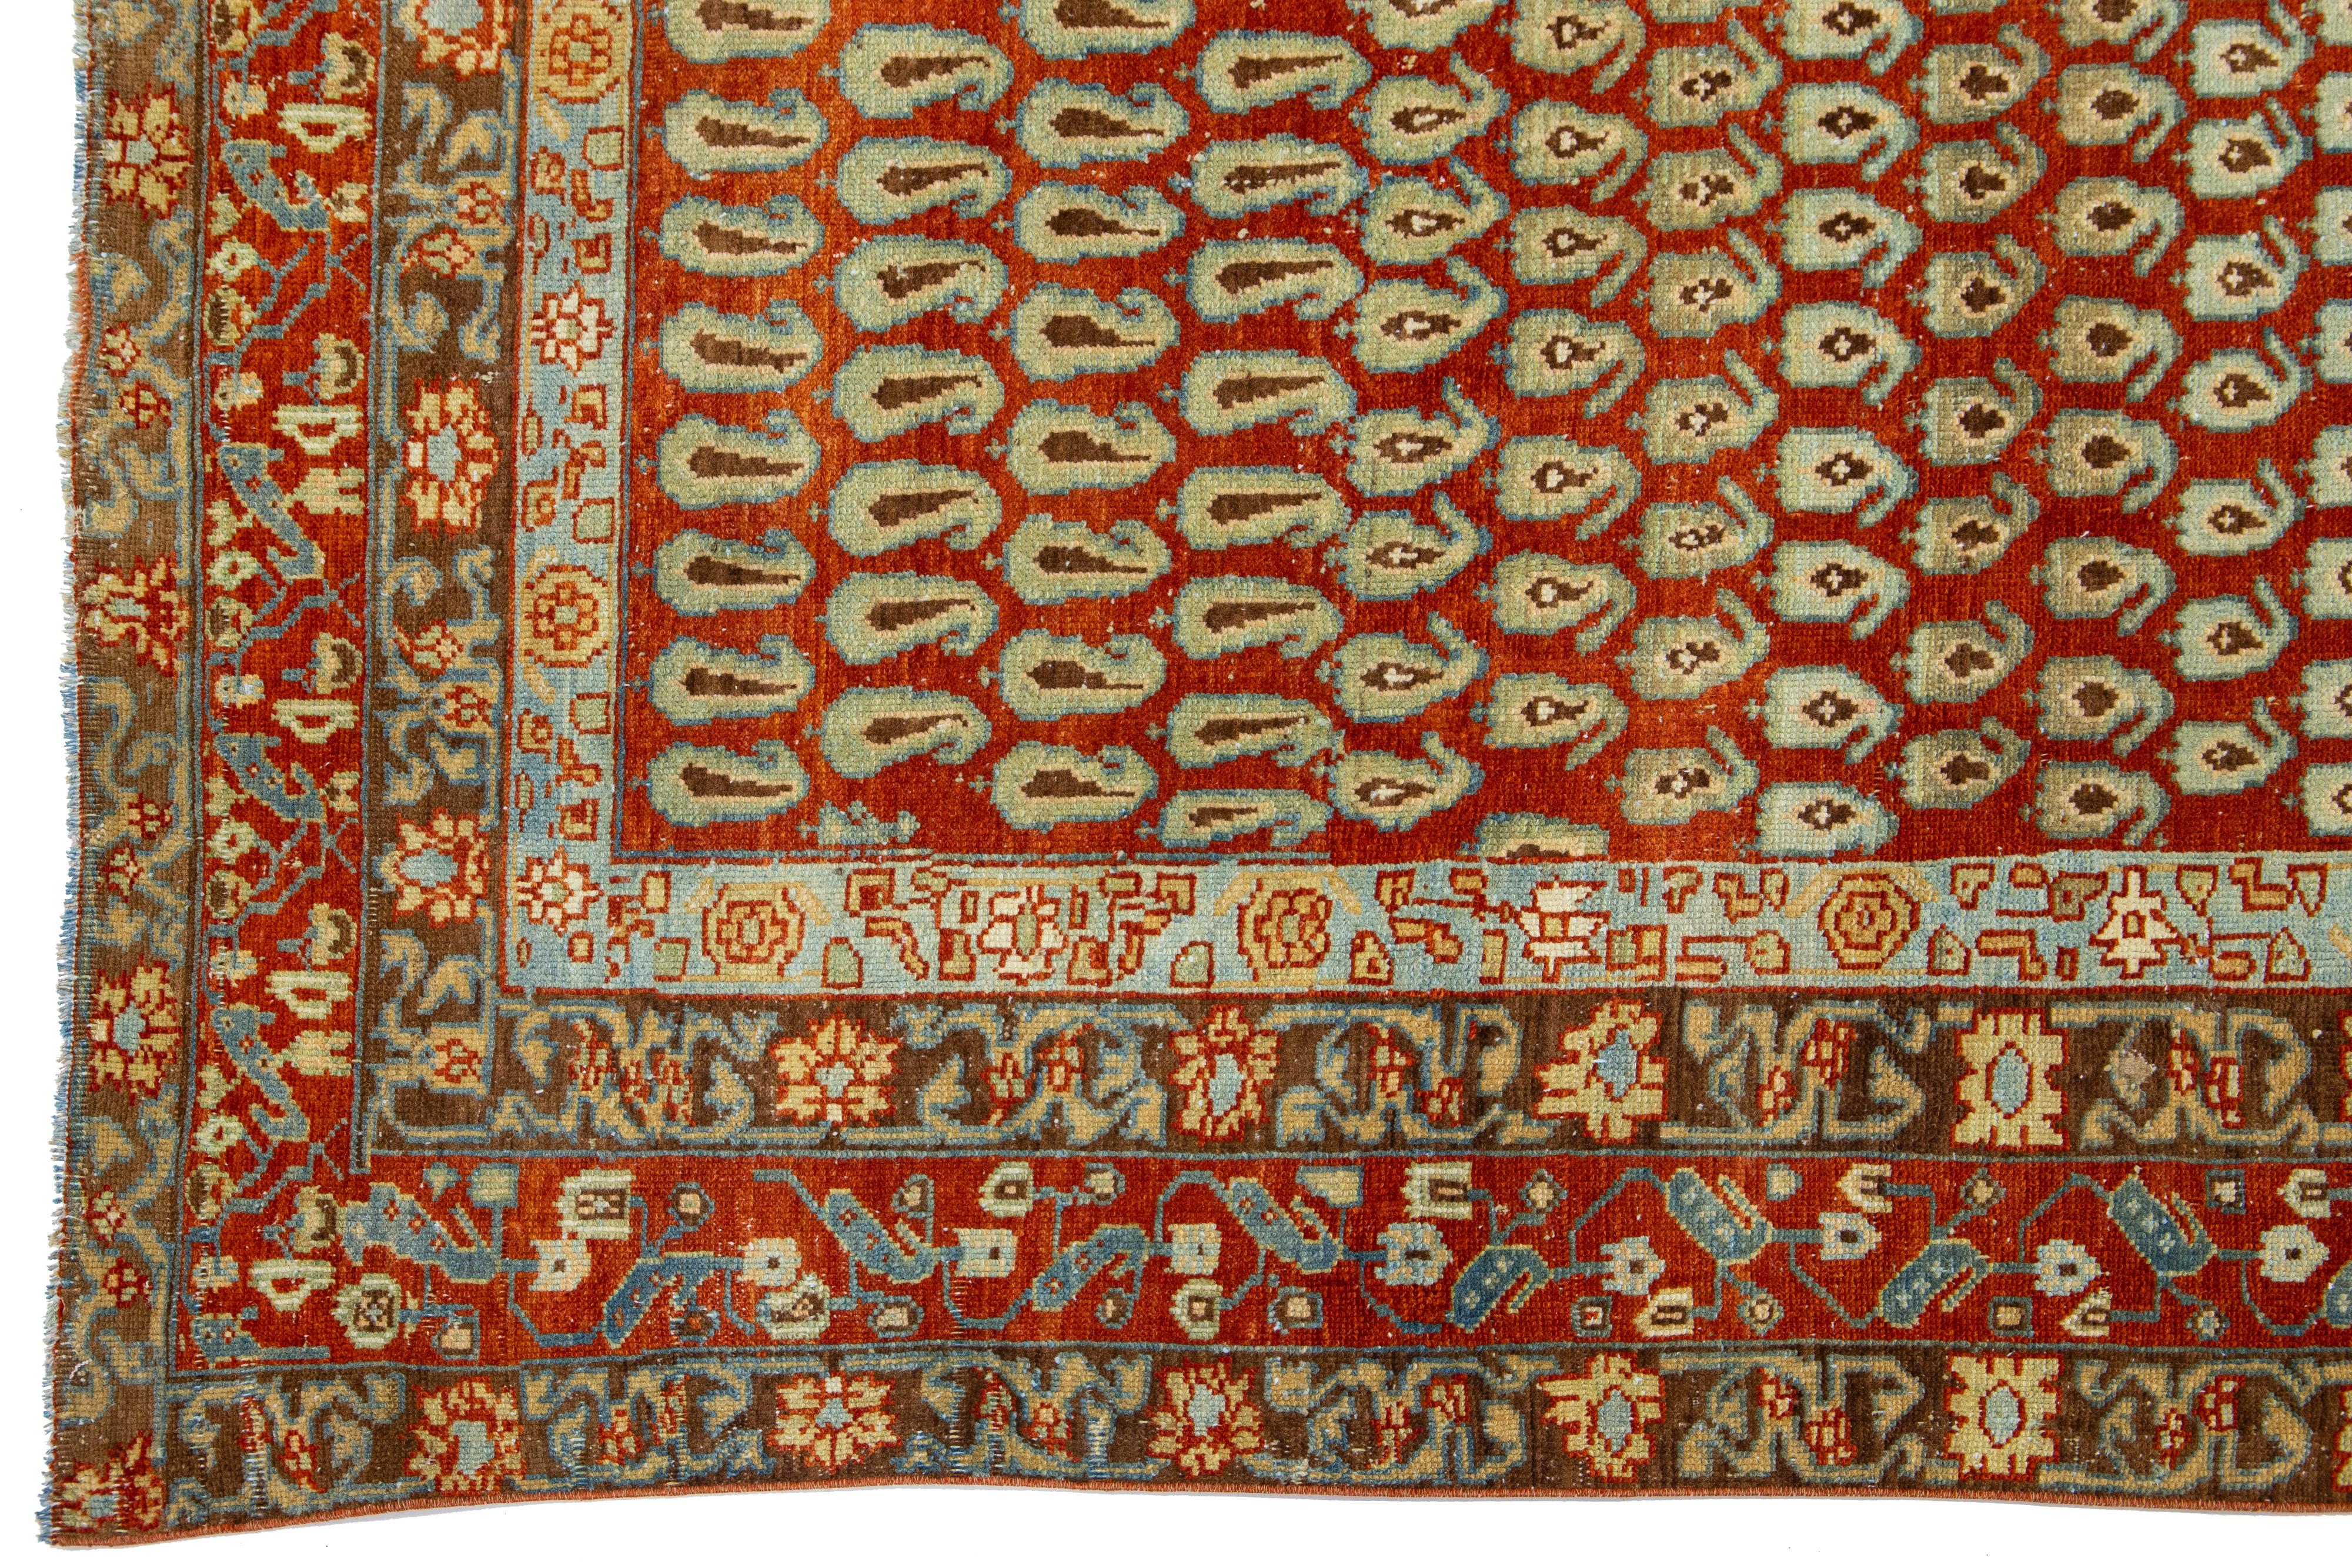 Allover Designed Antique Hamadan Persian Wool Rug In Red-Rust Color In Good Condition For Sale In Norwalk, CT